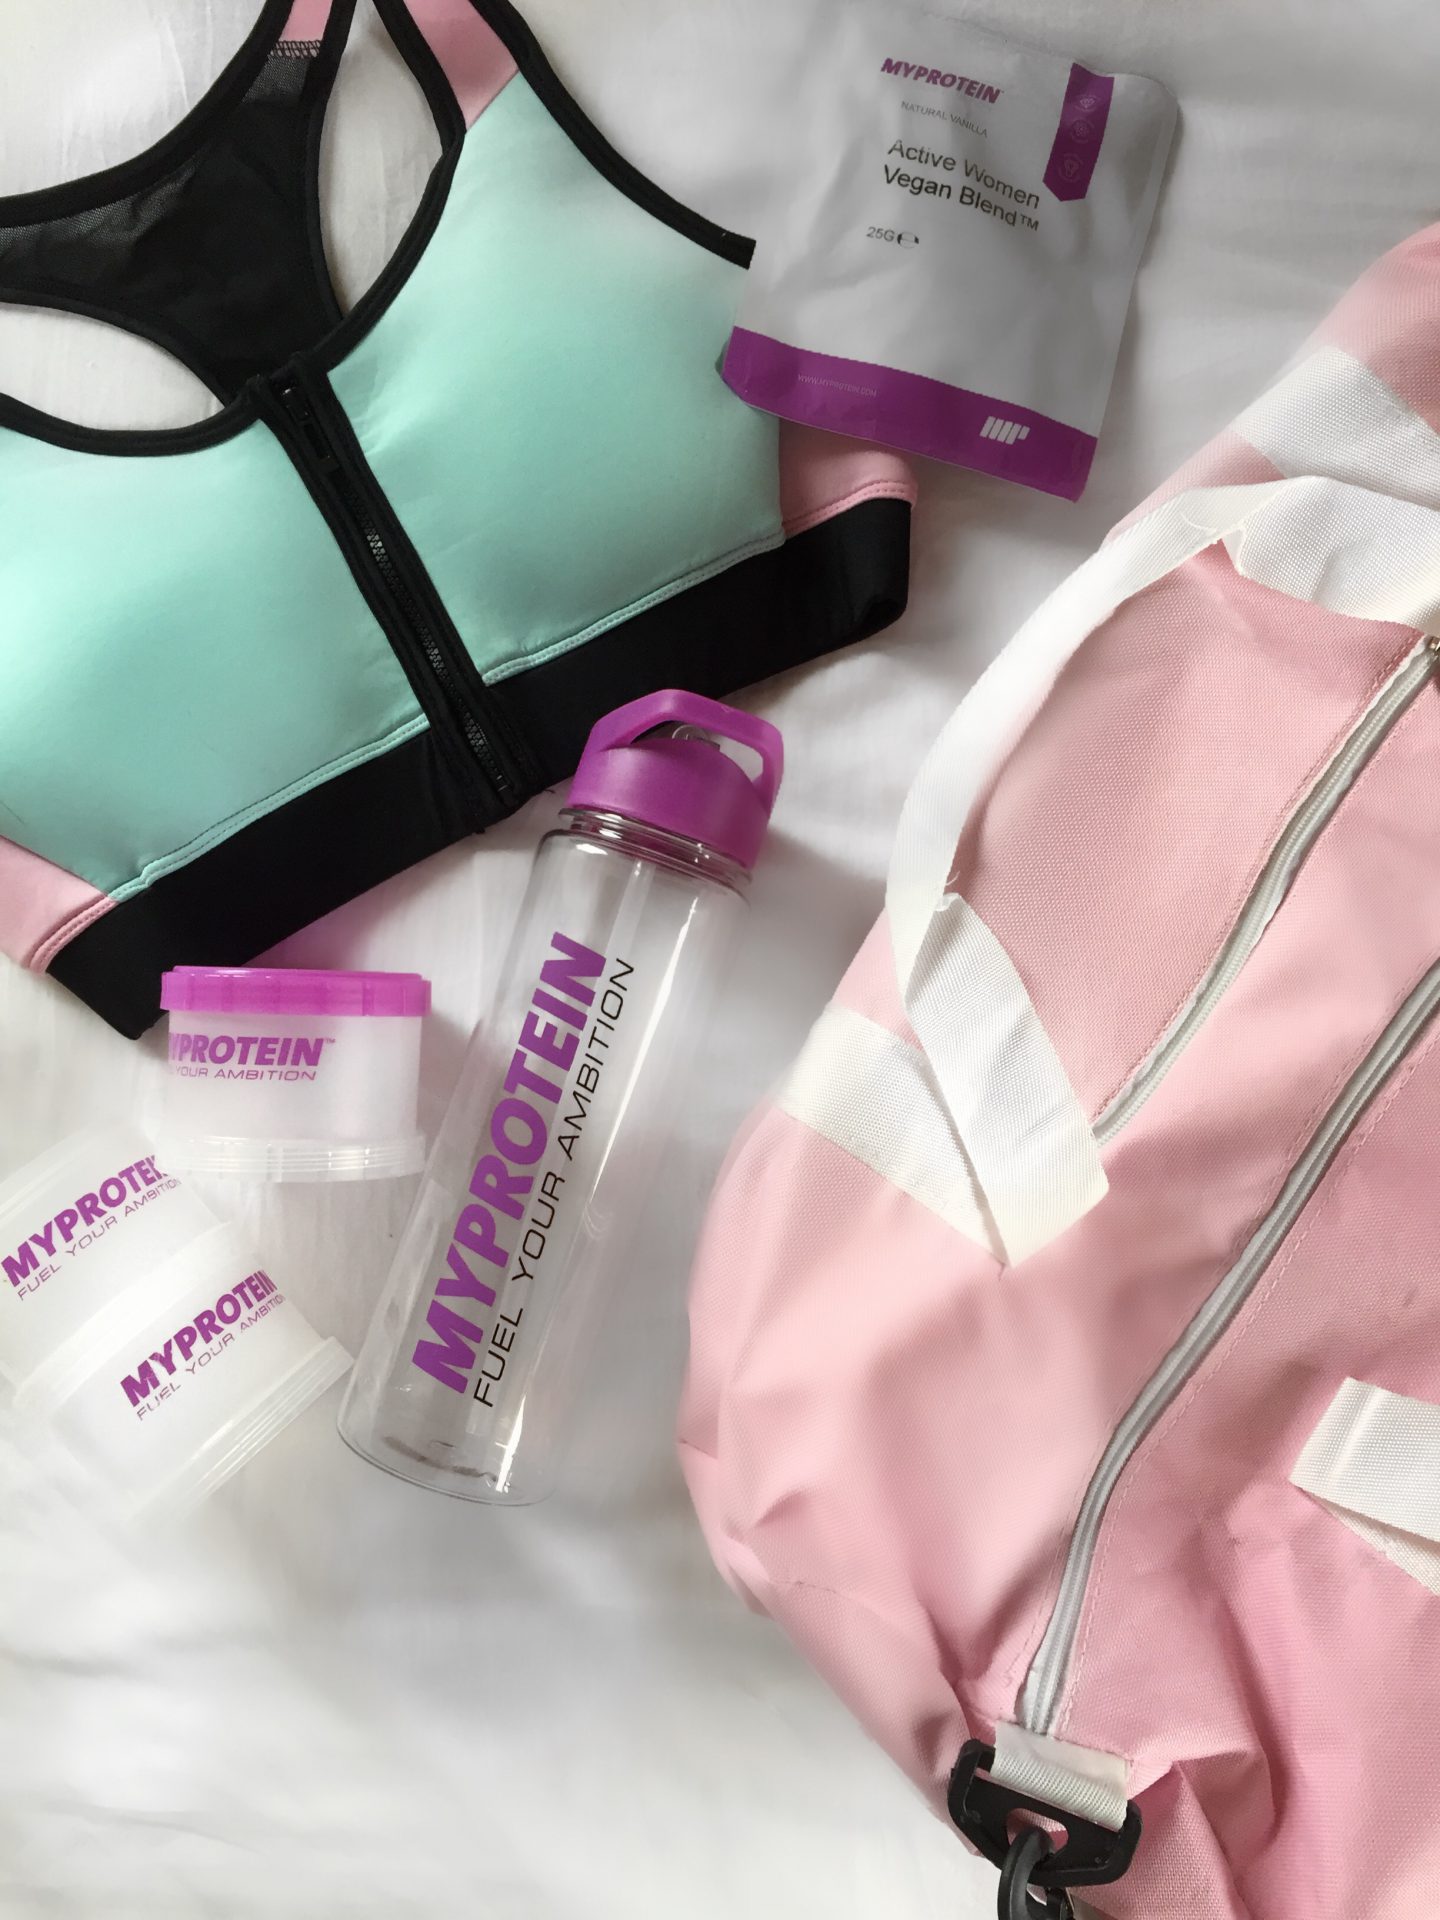 Workout Essentials: What’s in my gym bag